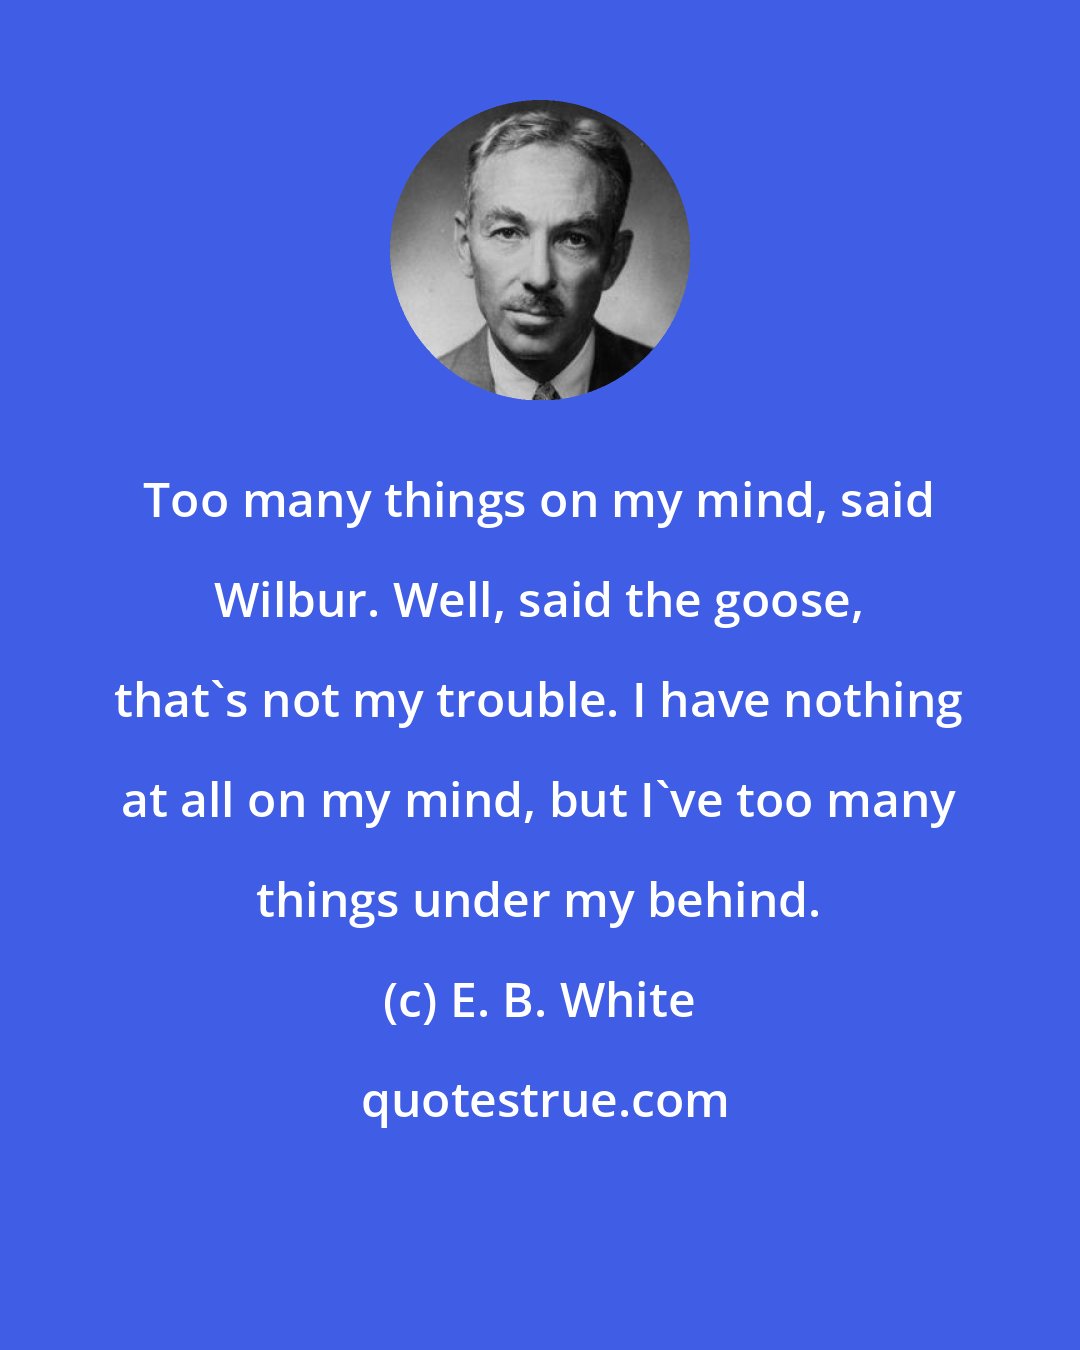 E. B. White: Too many things on my mind, said Wilbur. Well, said the goose, that's not my trouble. I have nothing at all on my mind, but I've too many things under my behind.